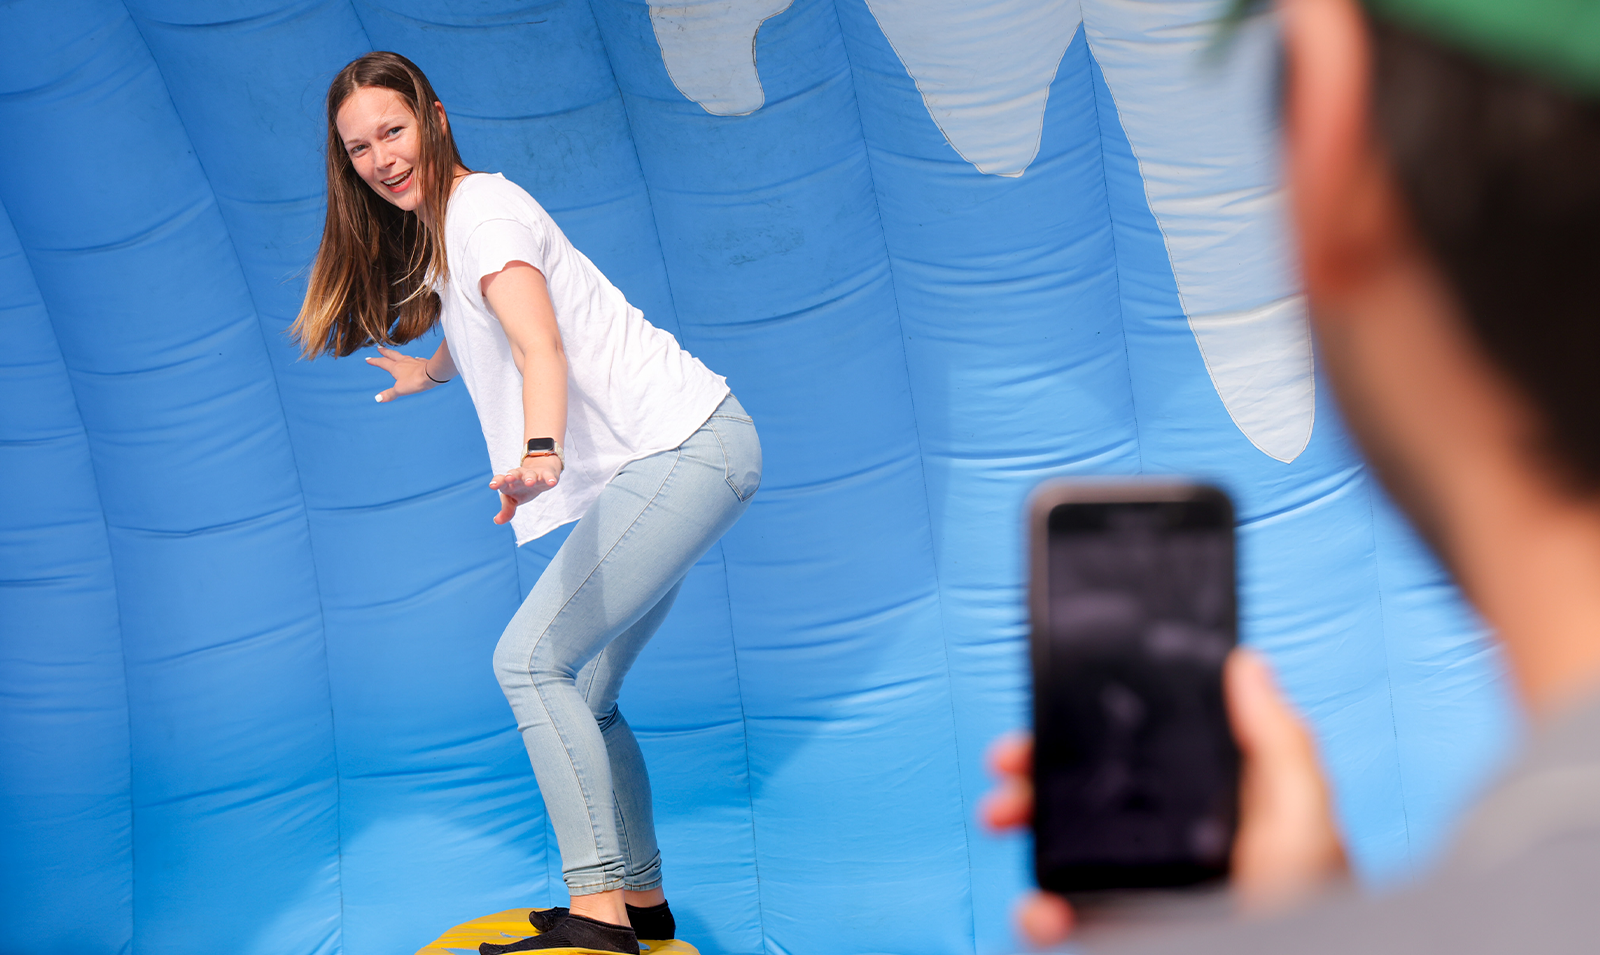 A woman riding on a surf simulator while a person in the foreground takes a picture on an iPhone.